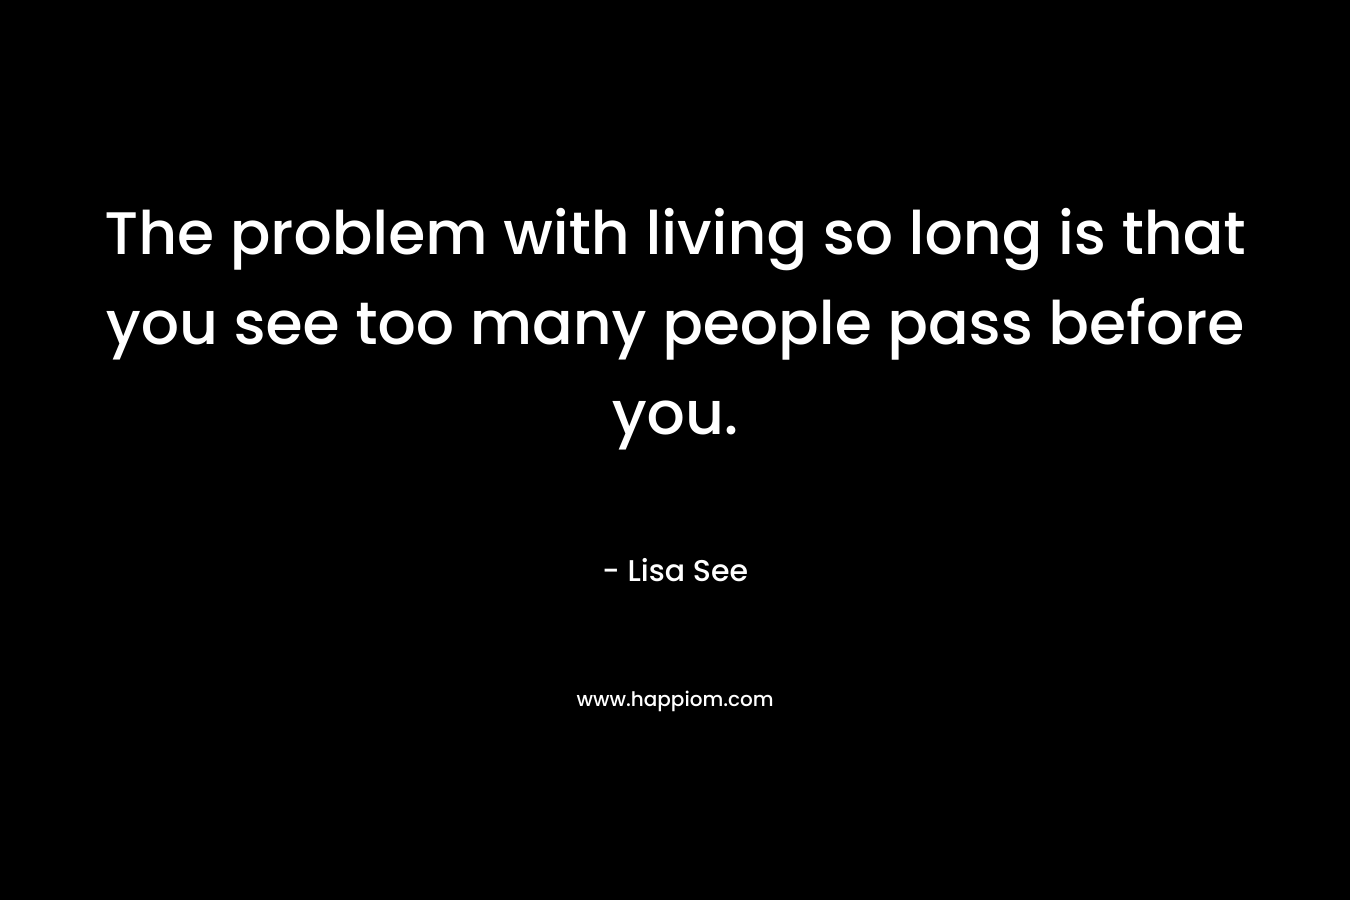 The problem with living so long is that you see too many people pass before you. – Lisa See